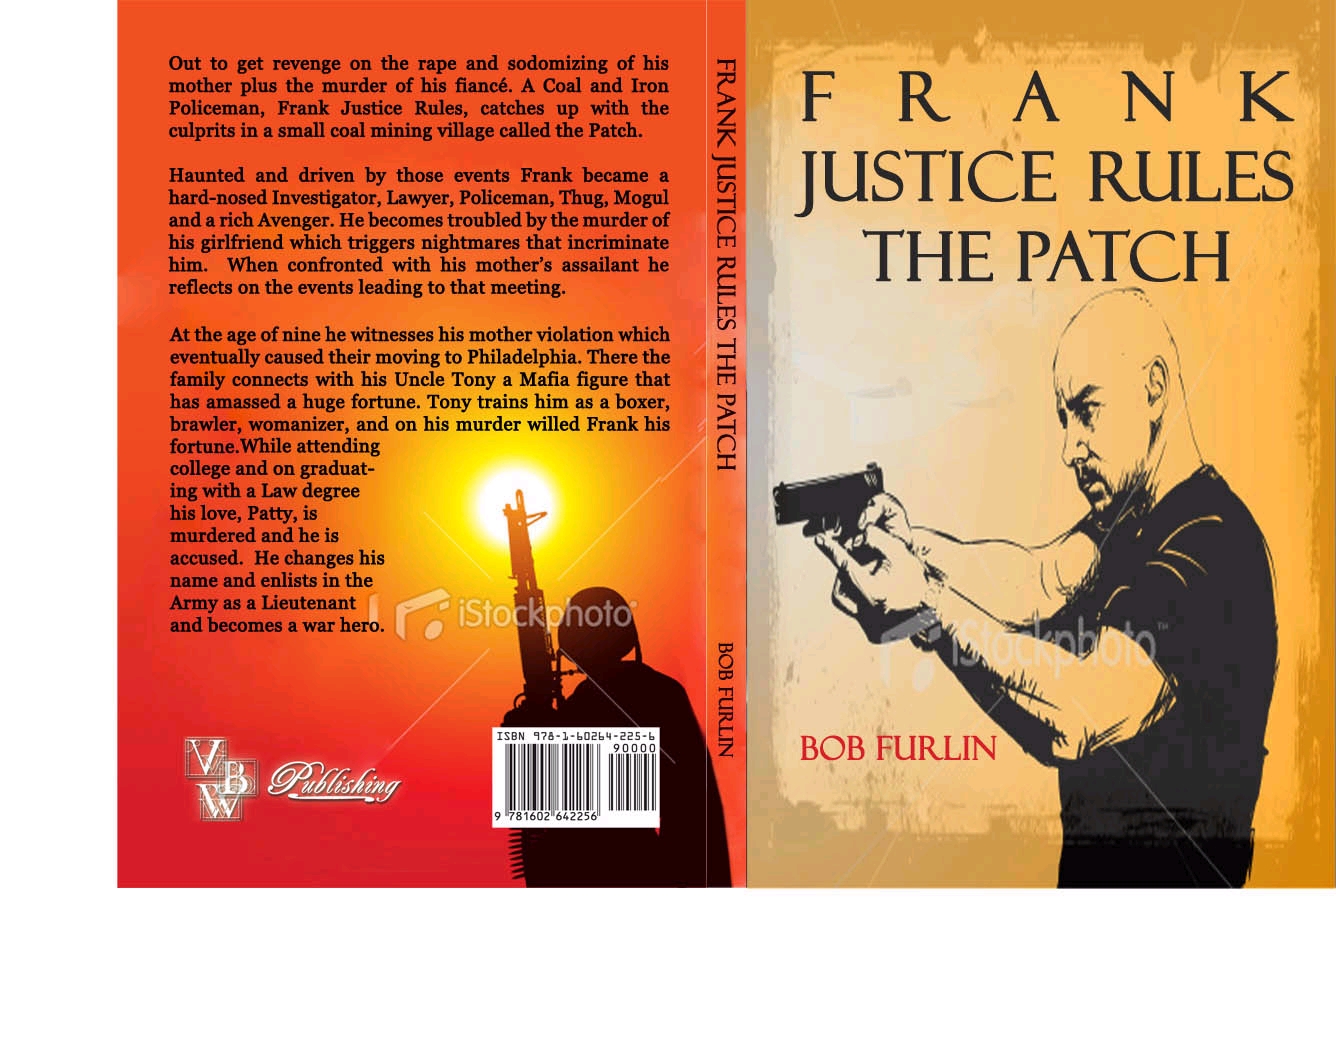 Frank Justice Rules